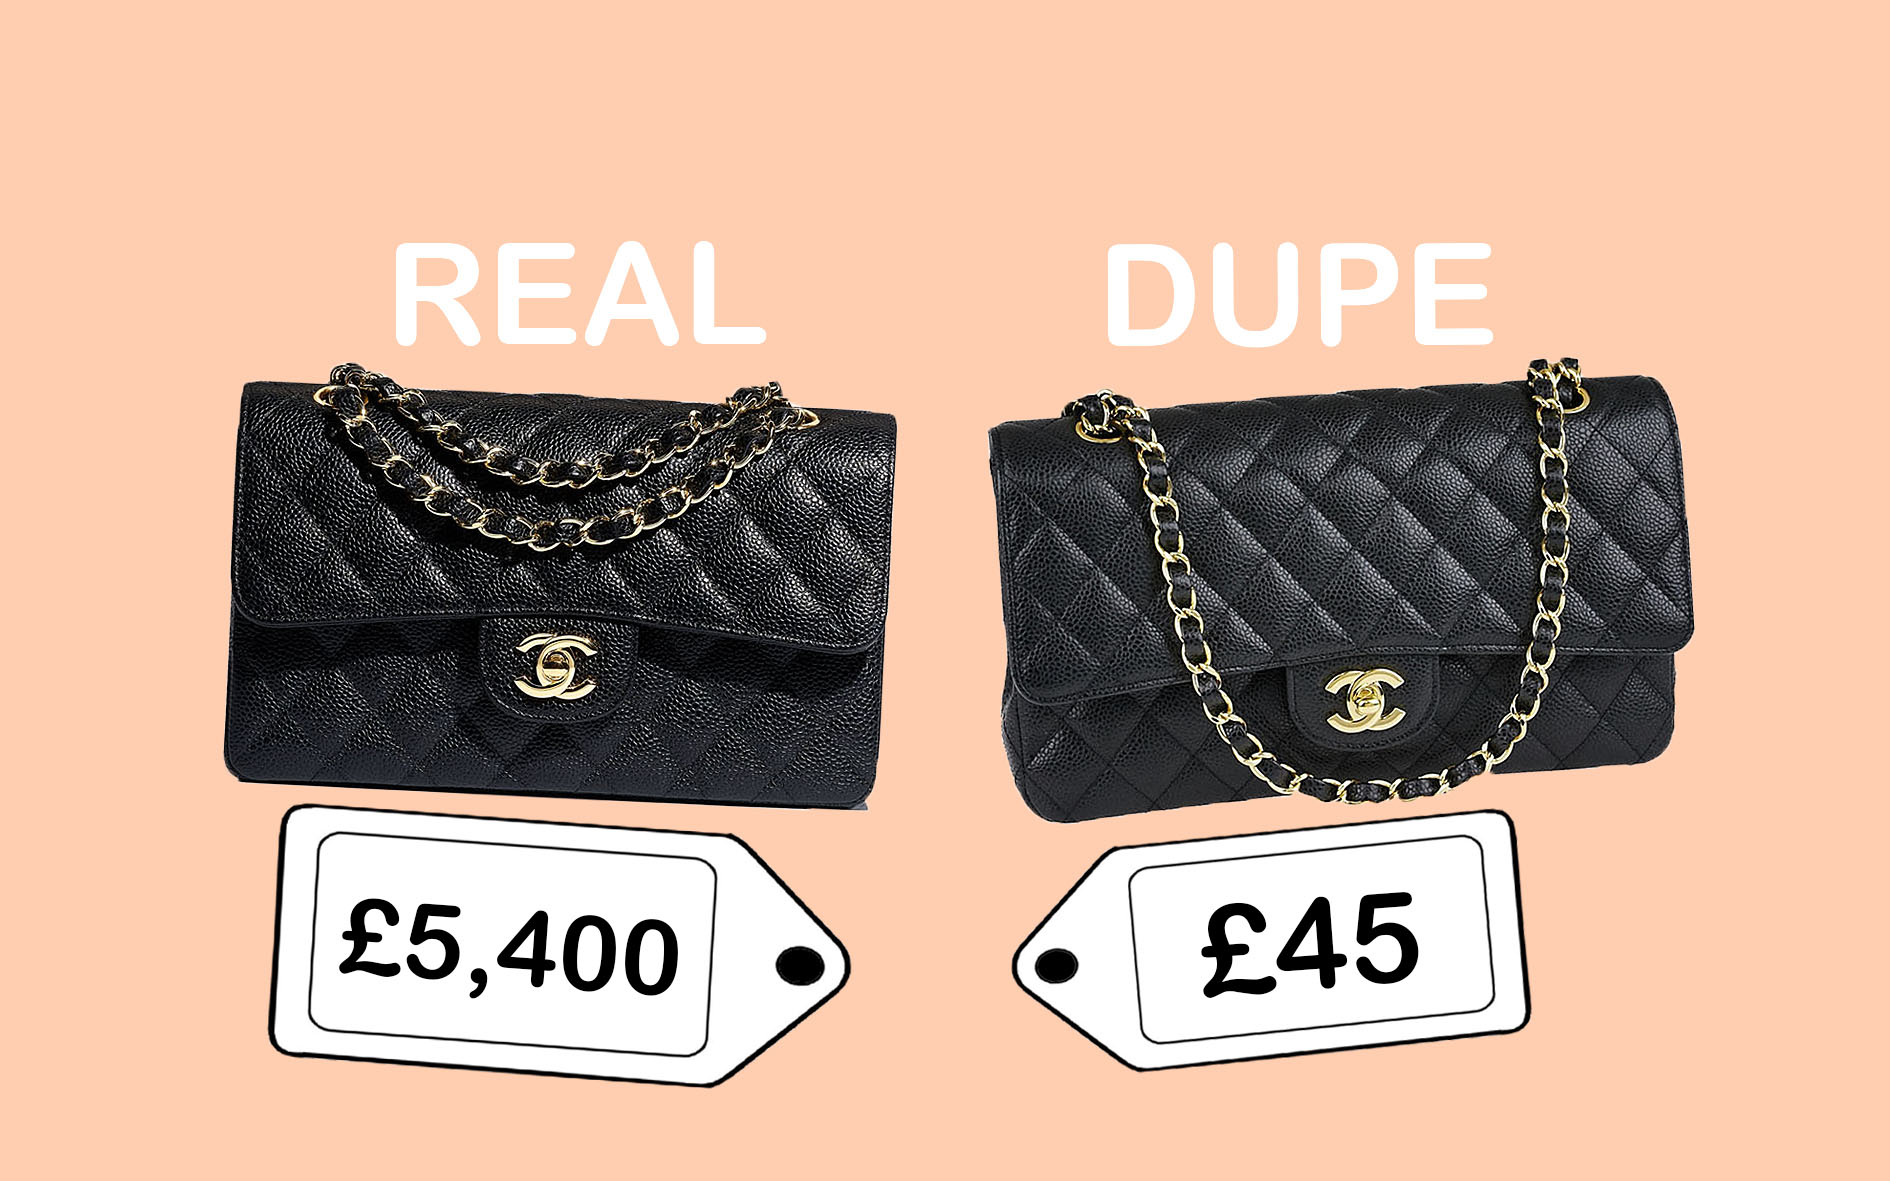 Chanel Handbag Dupes from Contemporary Designers Affordable Alternatives   Luxury Look for Less  YouTube